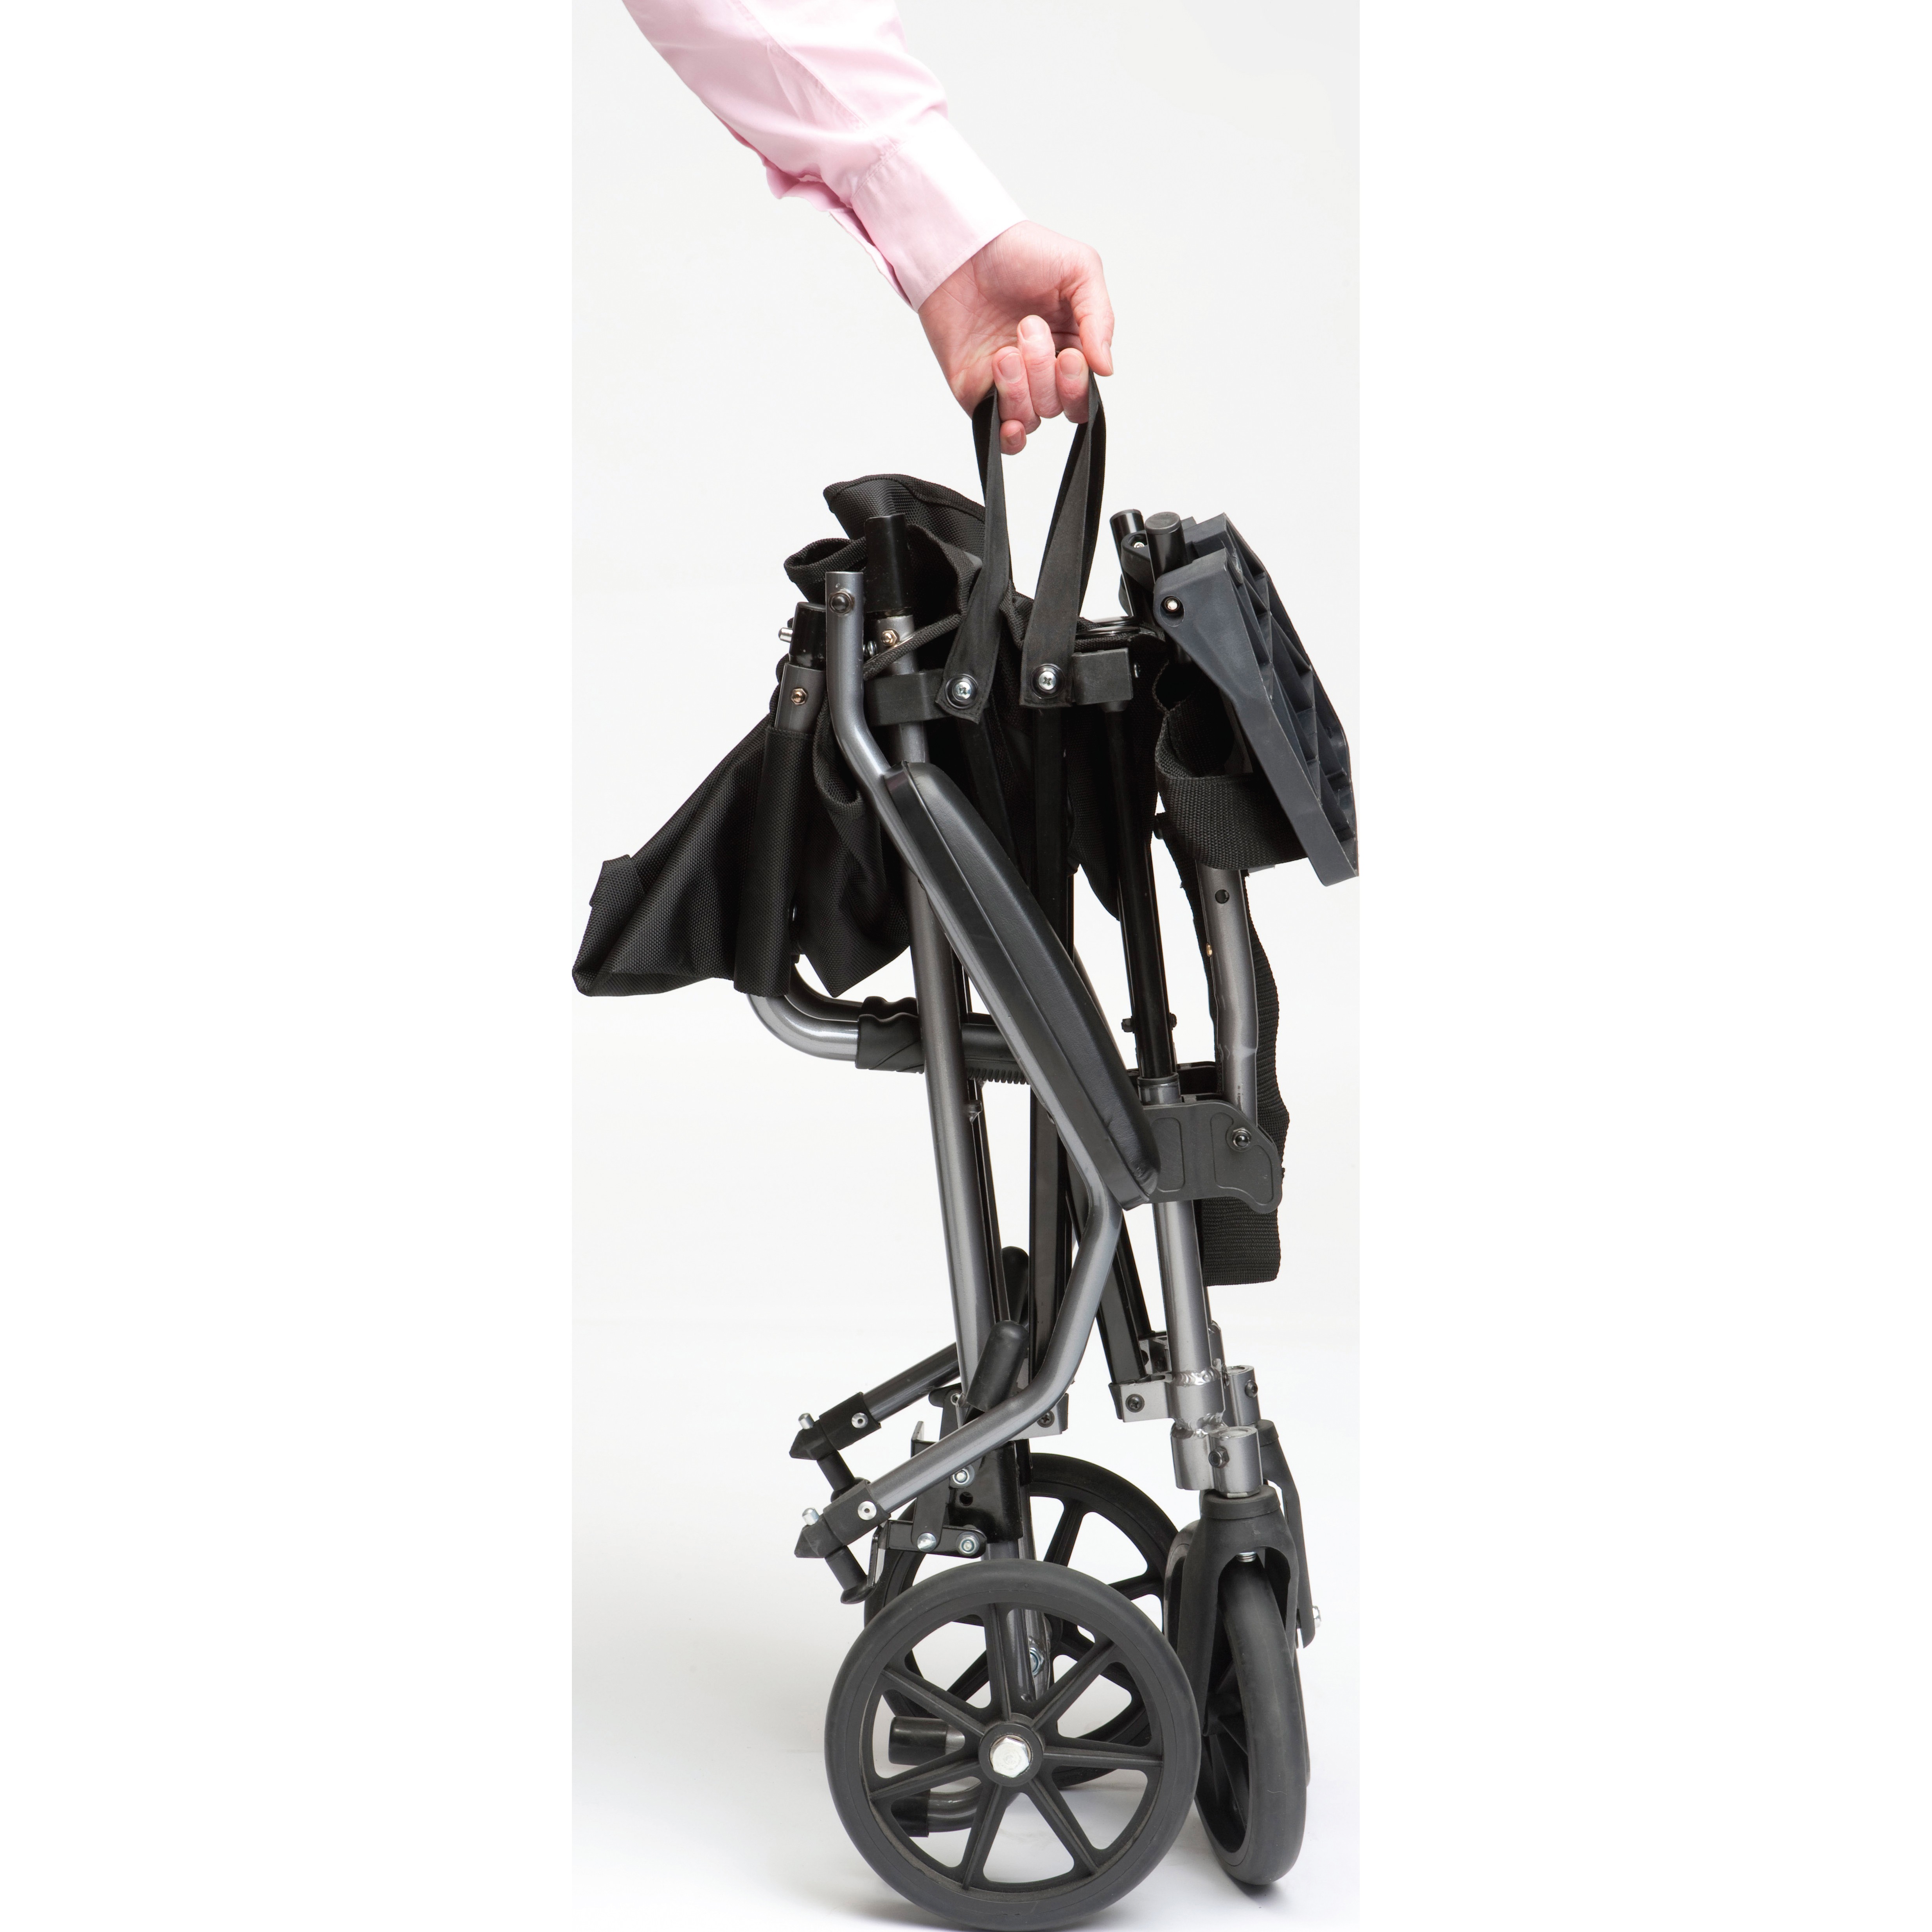 Drive Travelite Transport Chair in a Bag